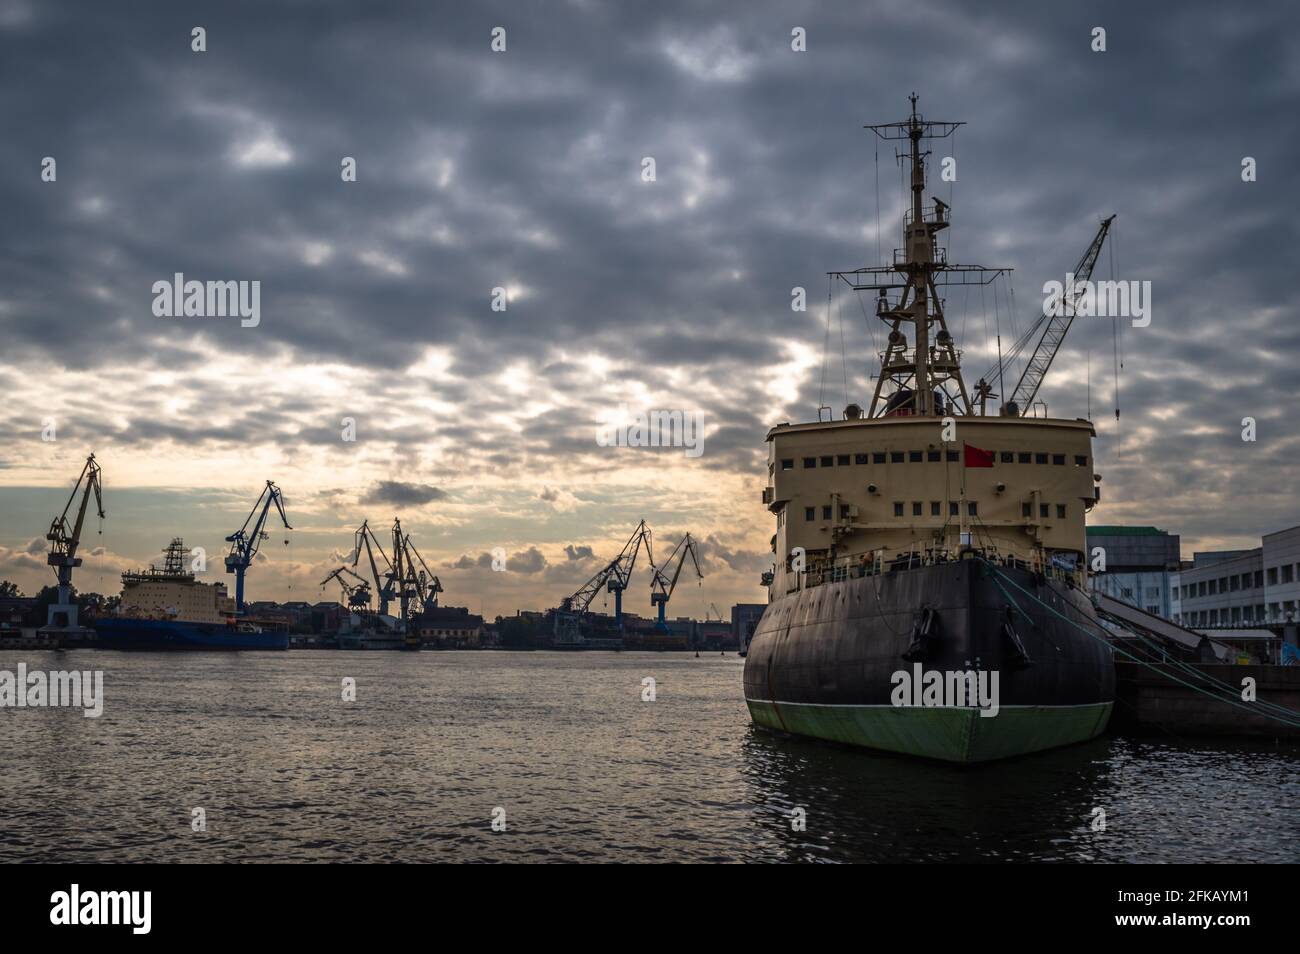 Lonely icebreaker ship surrounded by cranes at sunrise Stock Photo